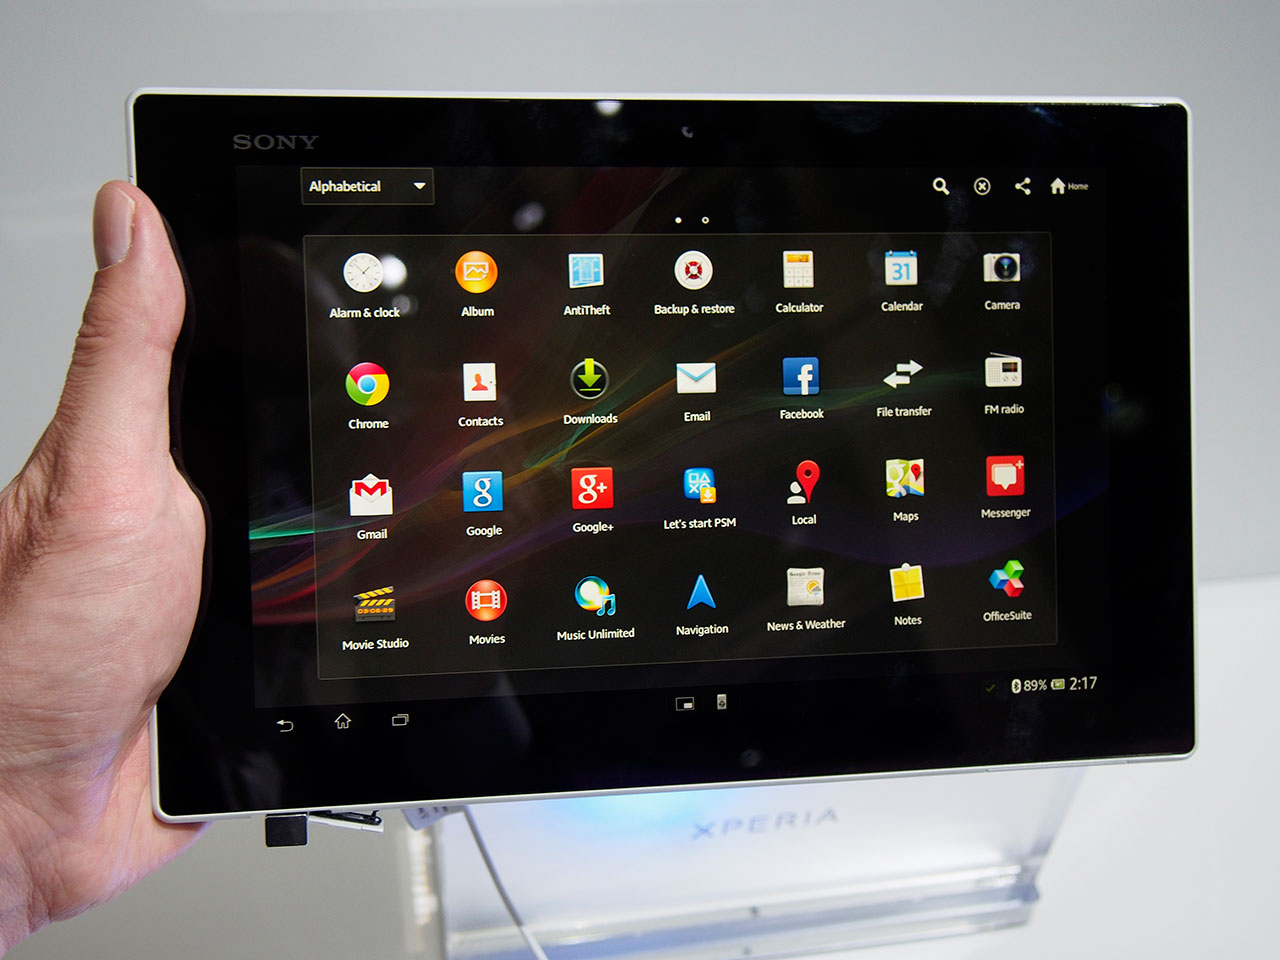 Enabling Data On Xperia Tablet: A Quick Guide